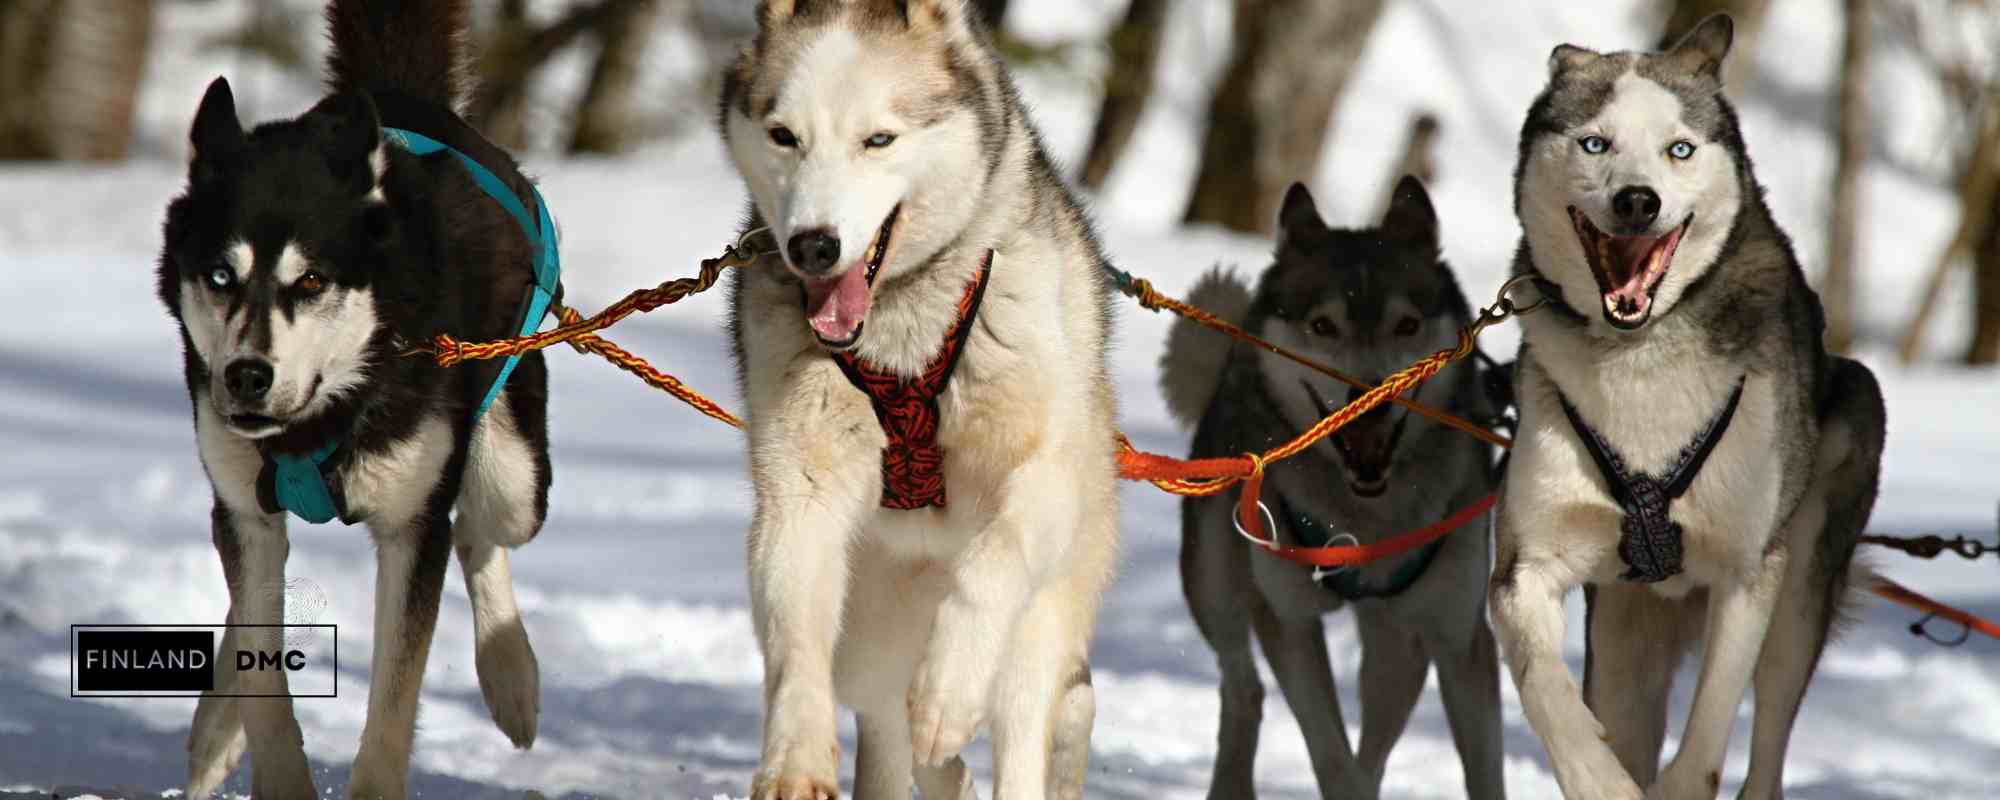 Visit Finland DMC's contract with Husky Park